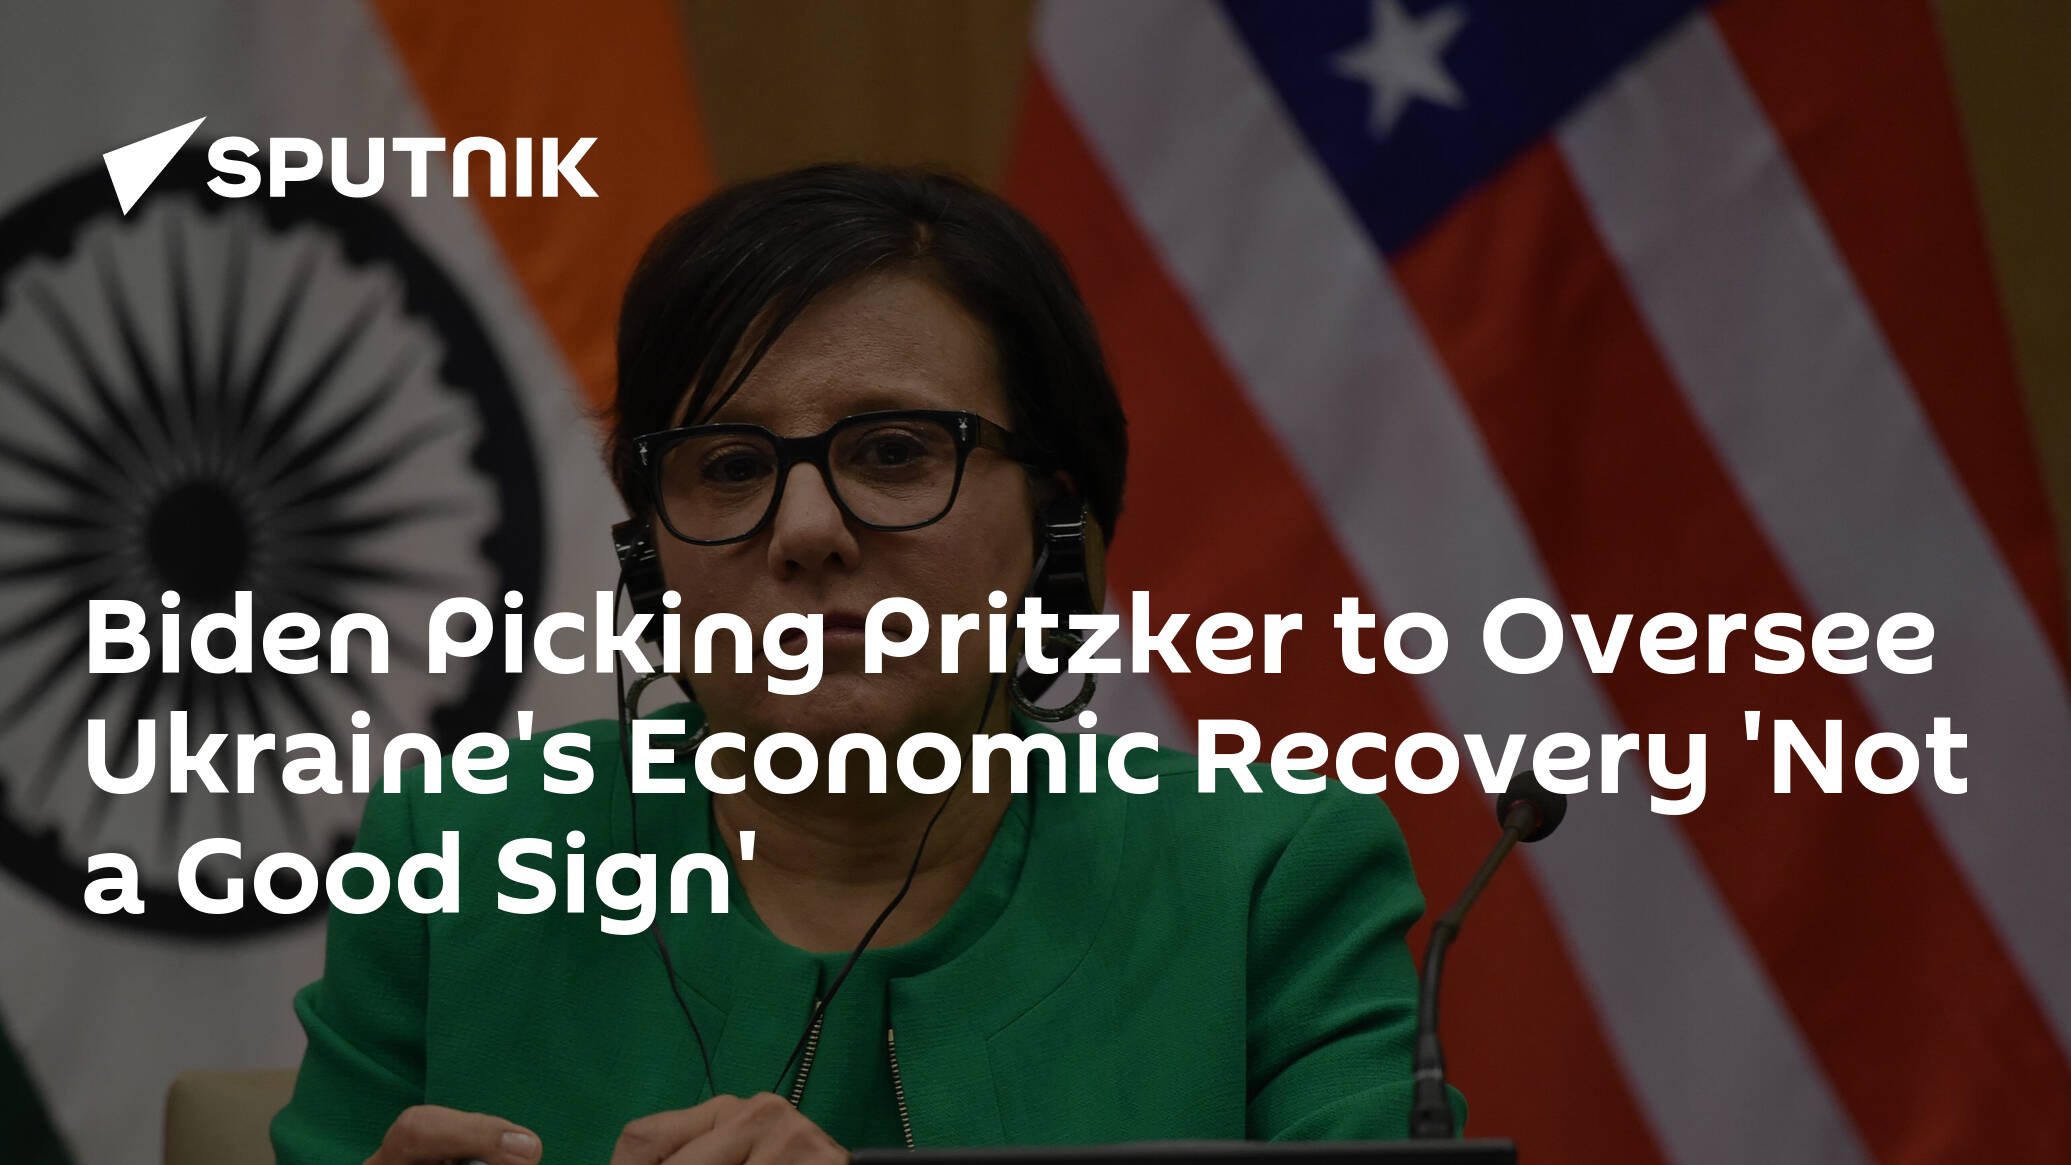 Biden Picking Pritzker to Oversee Ukraine's Economic Recovery 'Not a Good Sign'